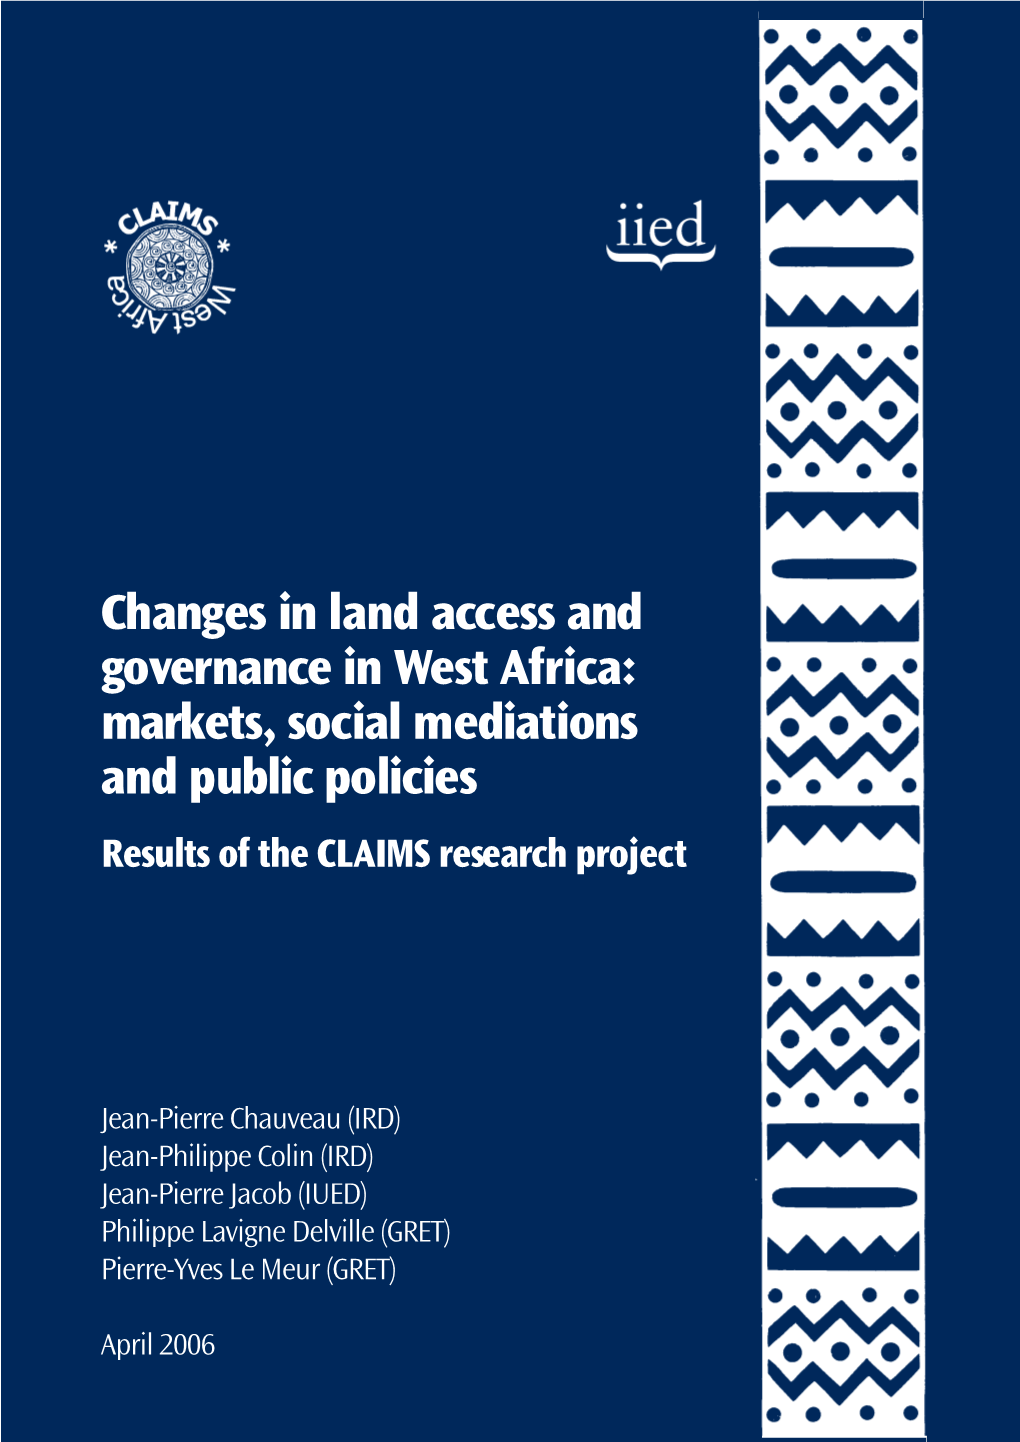 Changes in Land Access and Governance in West Africa: Markets, Social Mediations and Public Policies Results of the CLAIMS Research Project